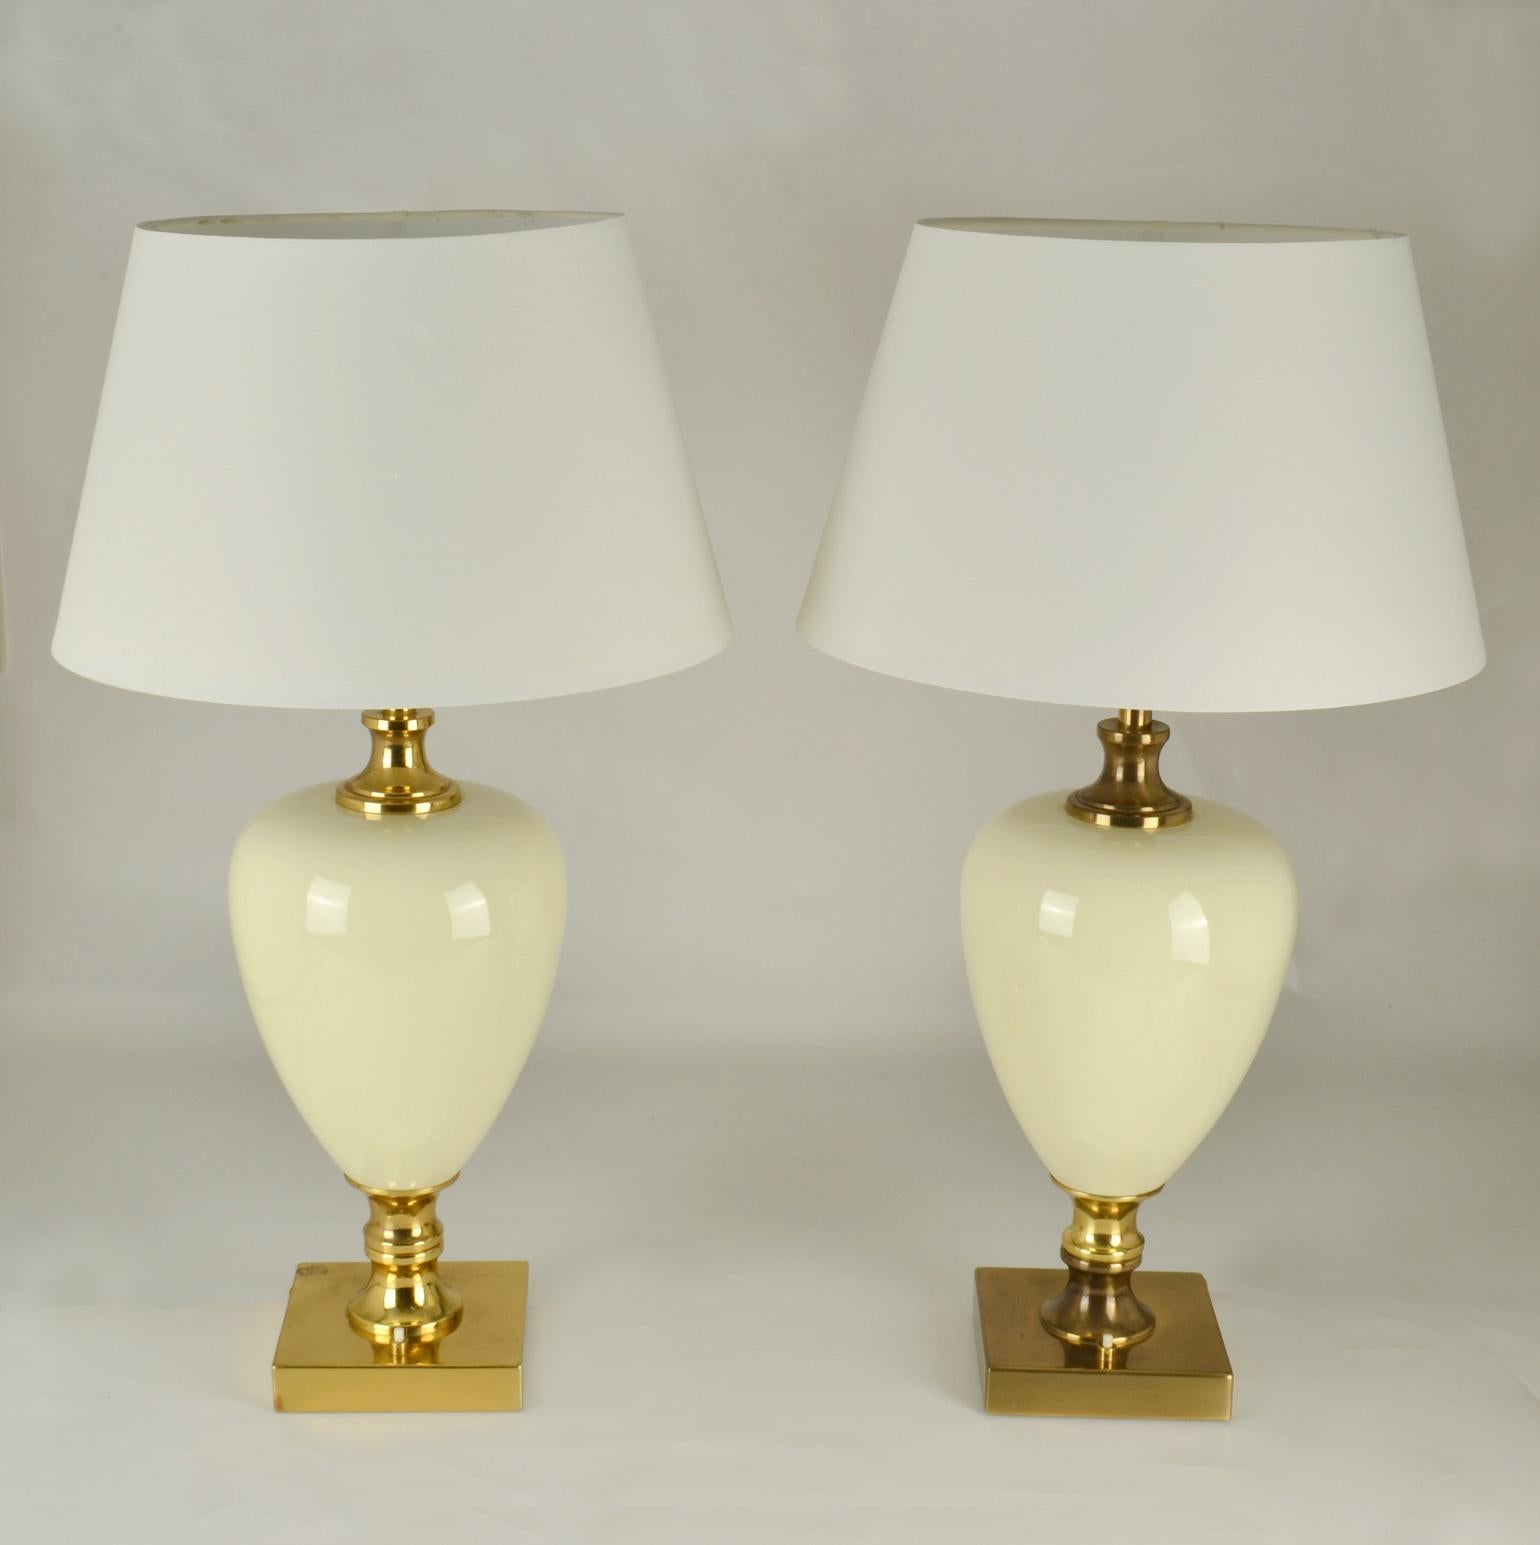 Pair of Italian Hollywood Regency table lamps with a body of cream shiny porcelain in the shape of an ostrich egg, encased by an elegant foot and top section in brass by Zonca, 1970's.
White new tapered shades are included.
Dimensions of the base